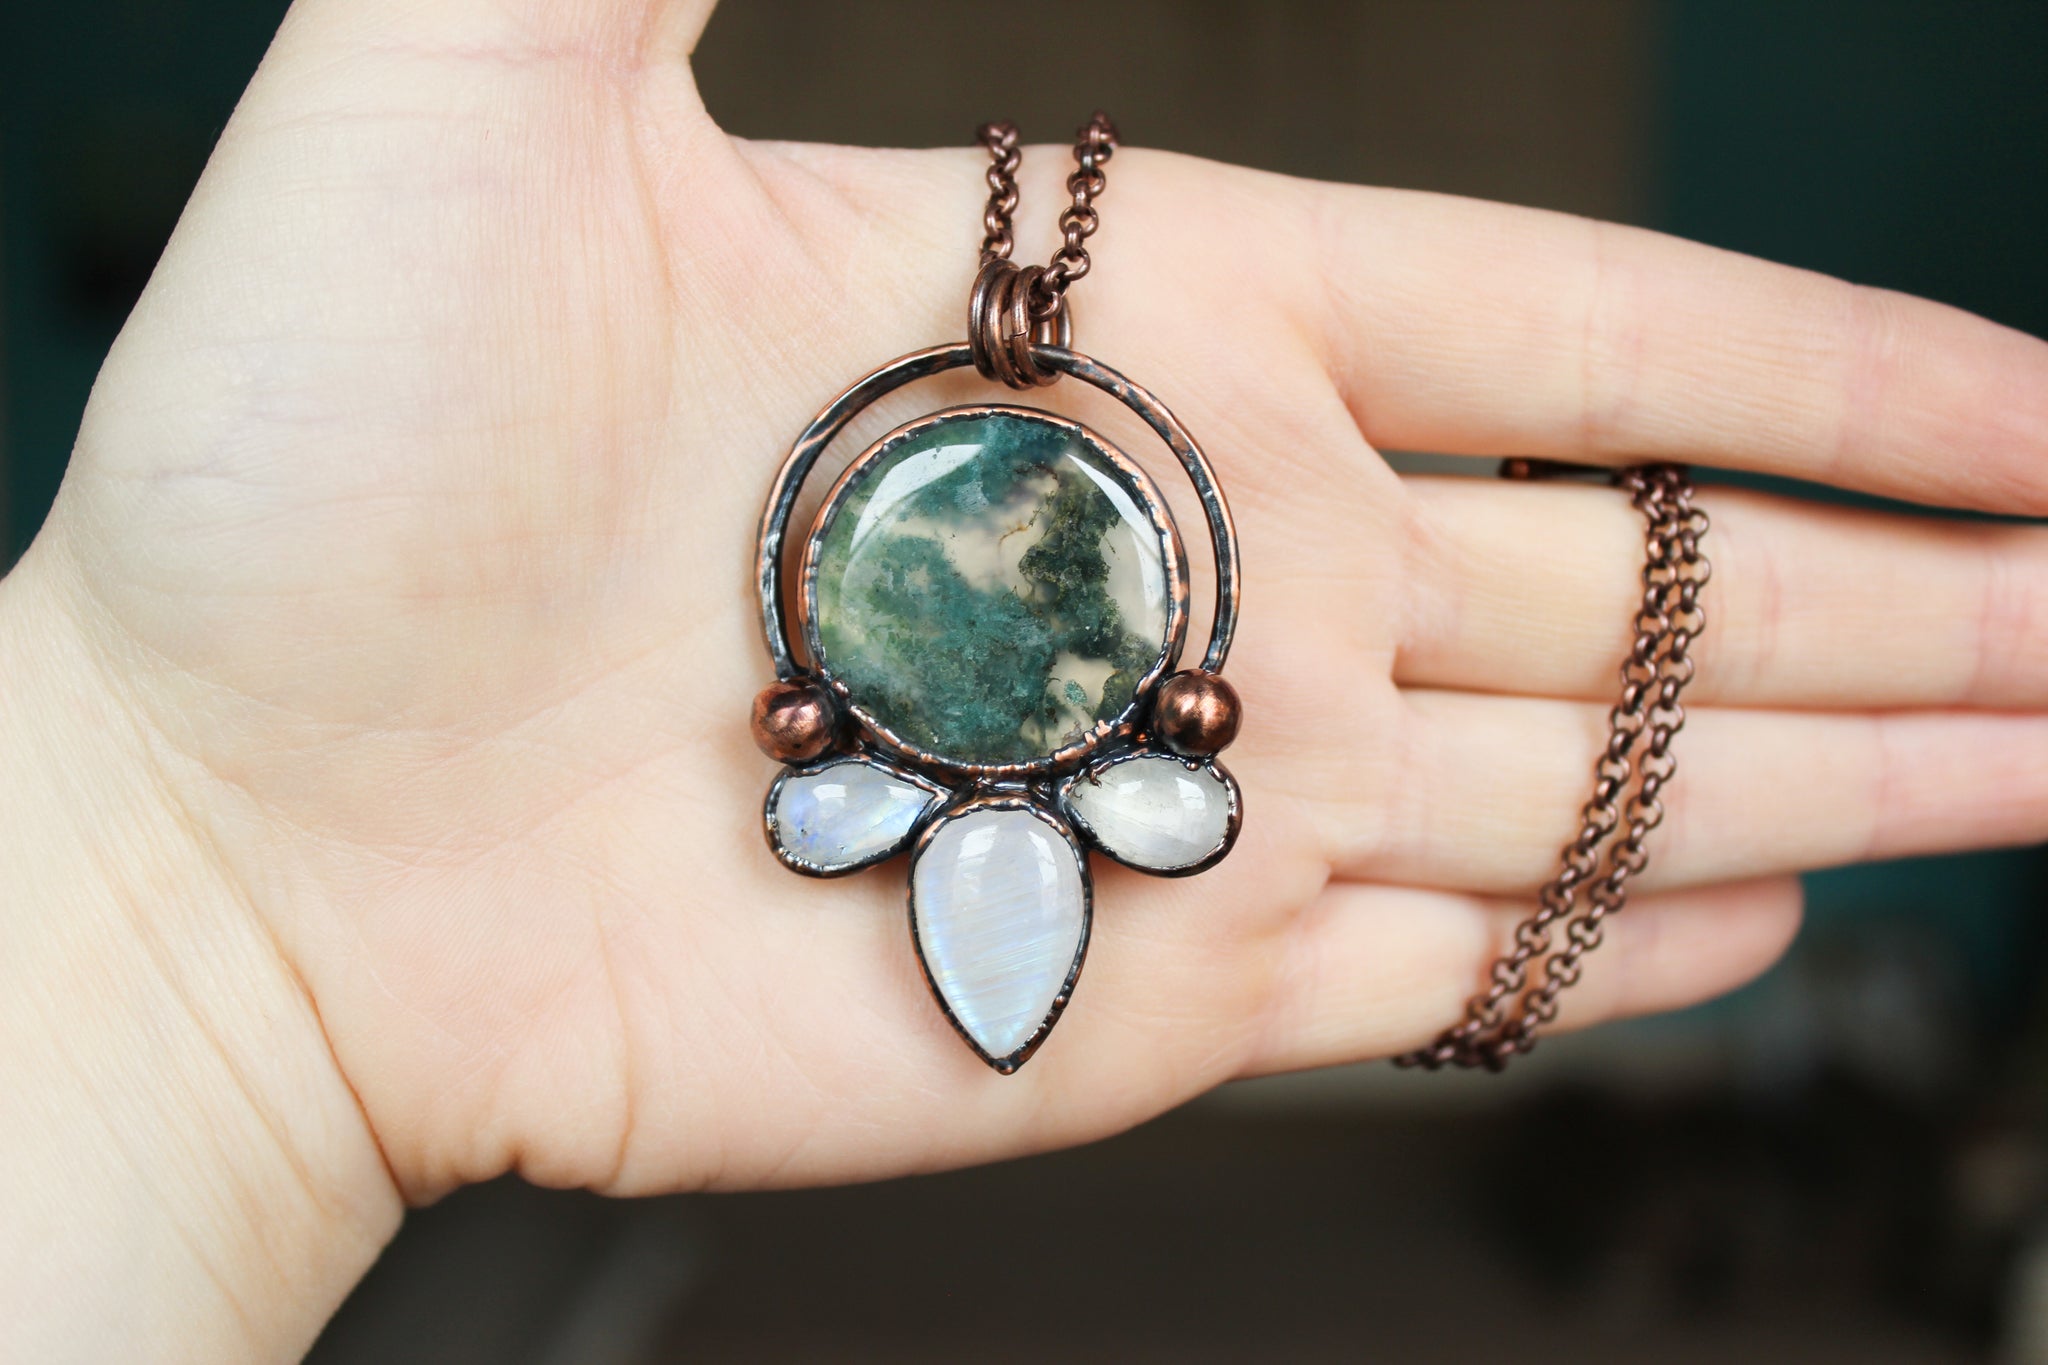 Moss Agate Moon Phase Necklace - a